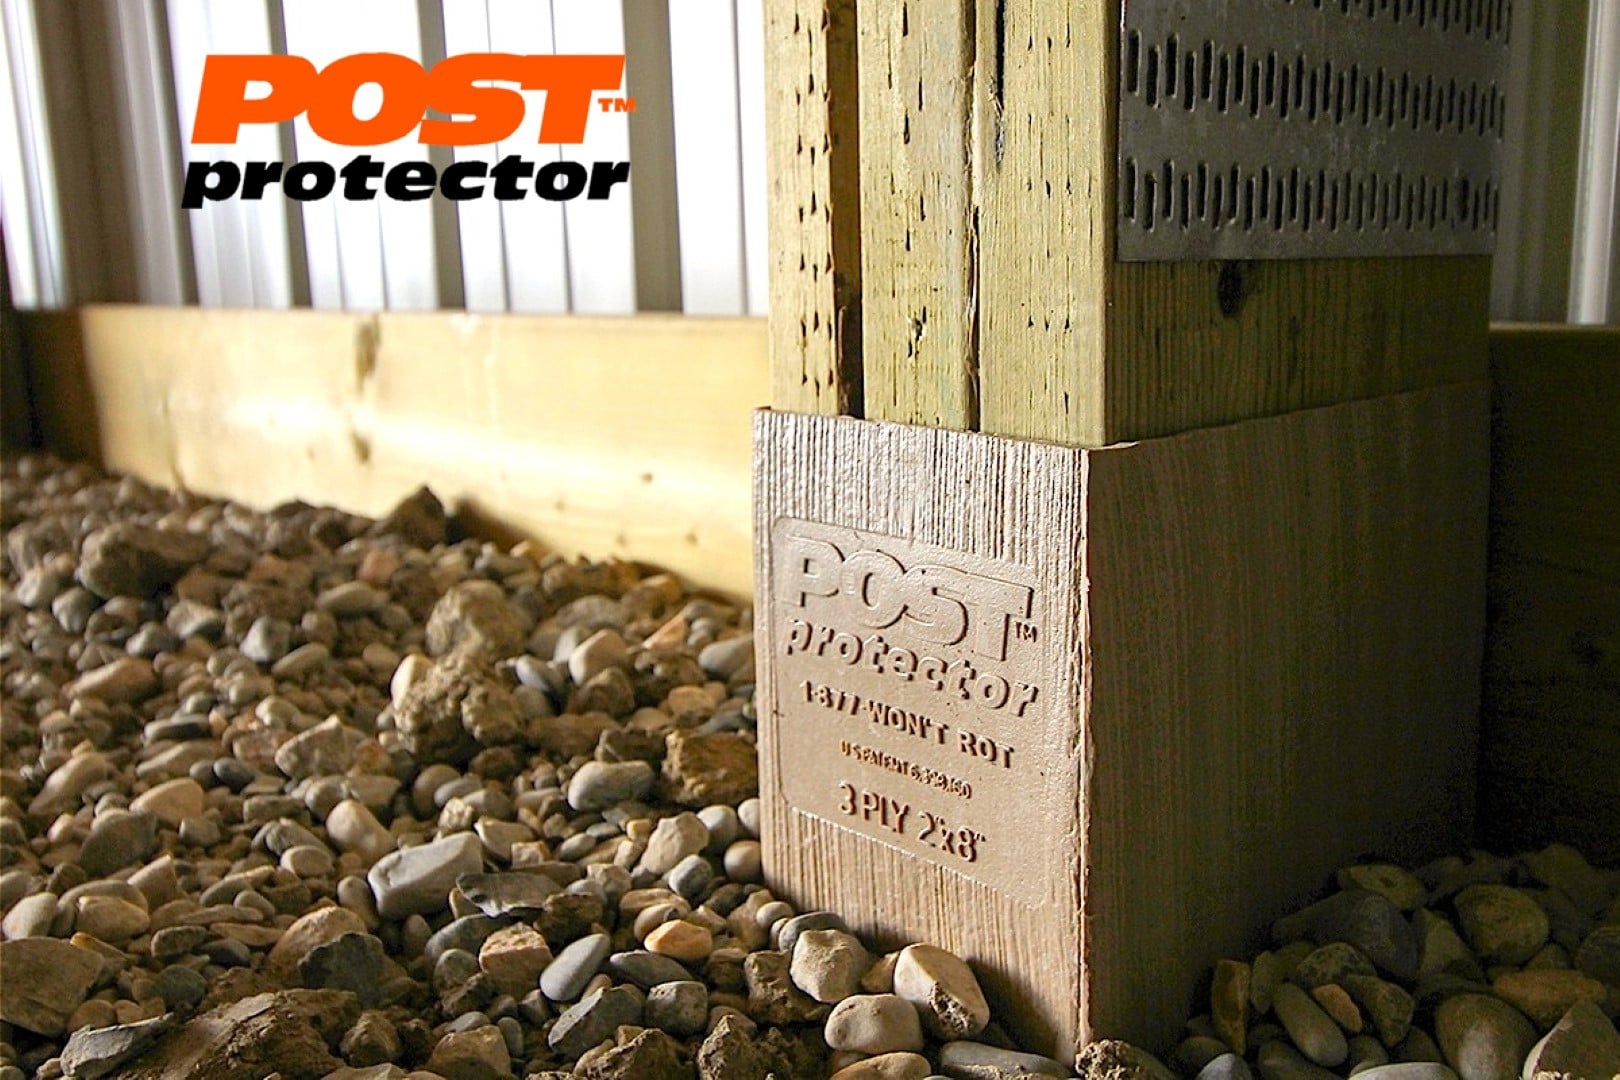 Post Protector Decay Protection 5.5-in x 5.5-in x 3-1/2-ft Cedar Tone Deck  Post Sleeve in the Deck Posts & Post Sleeves department at